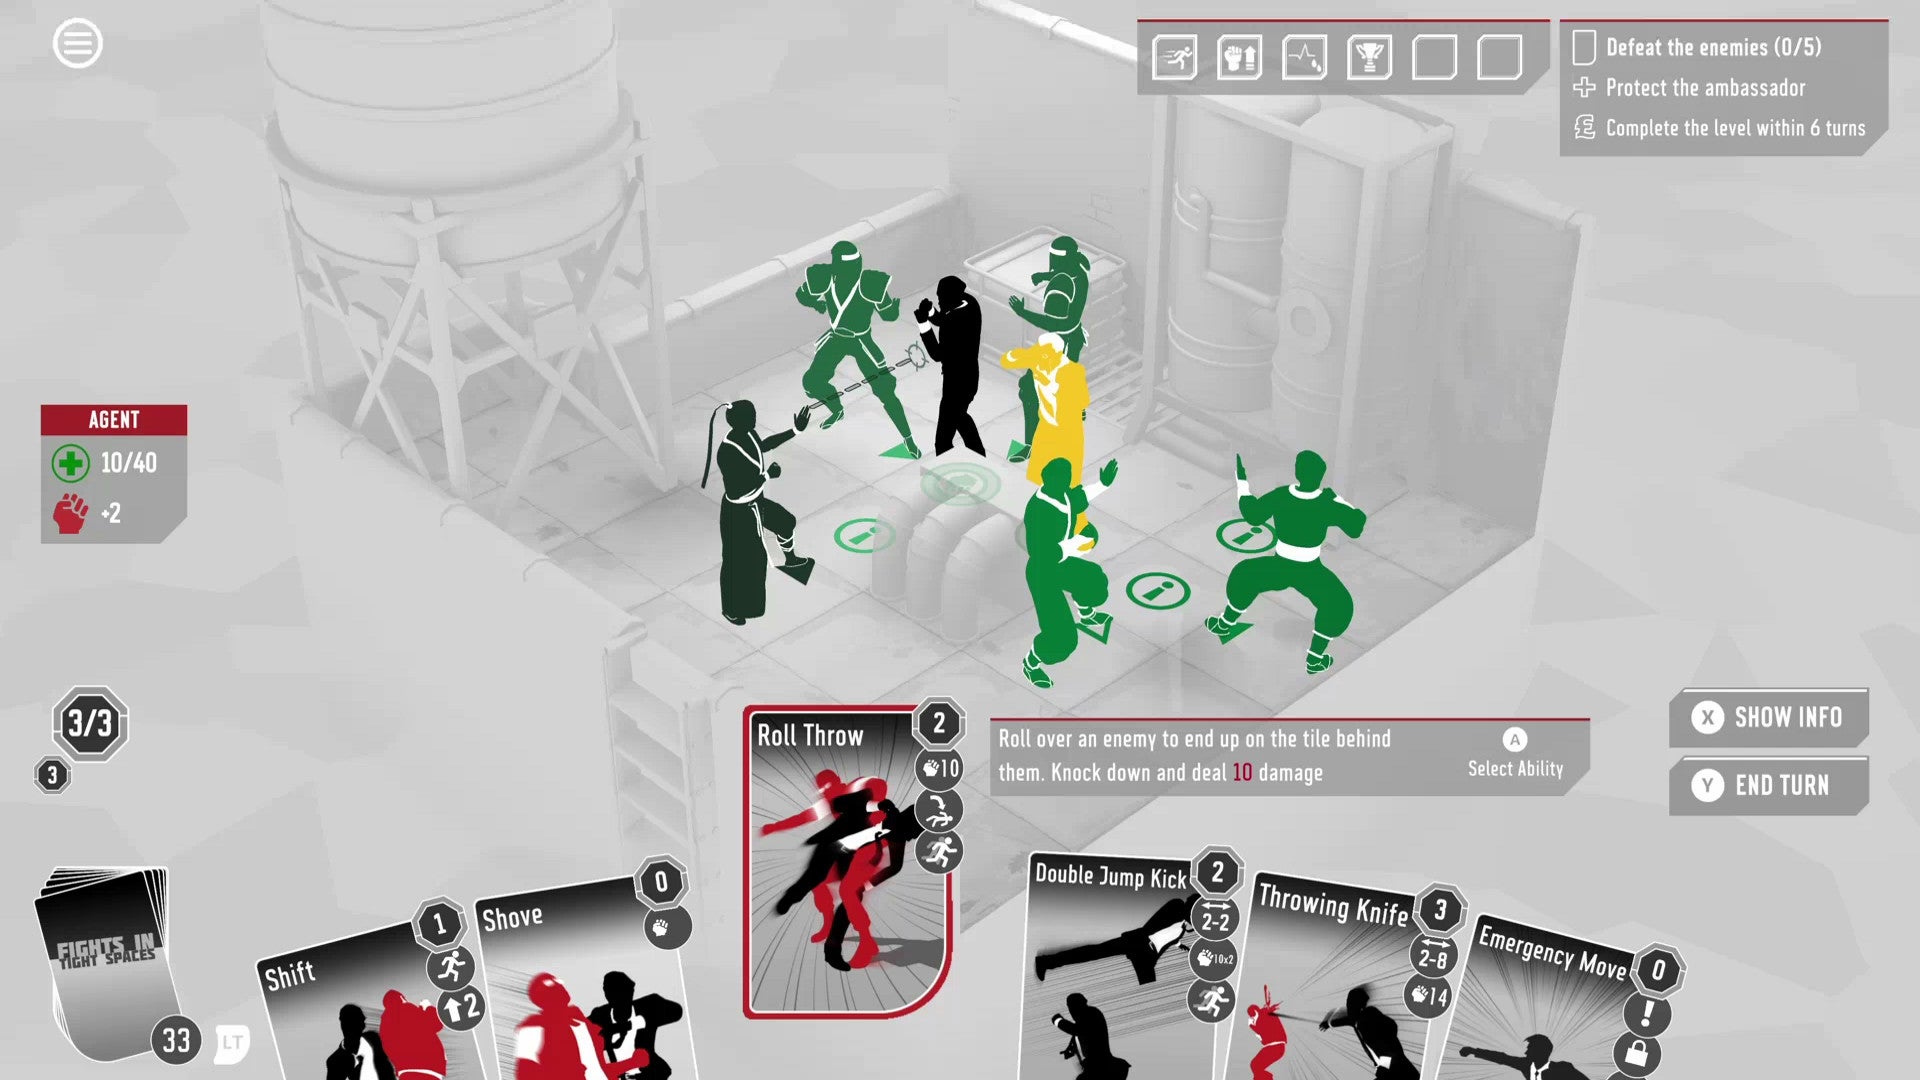 fights in tight spaces digital card game